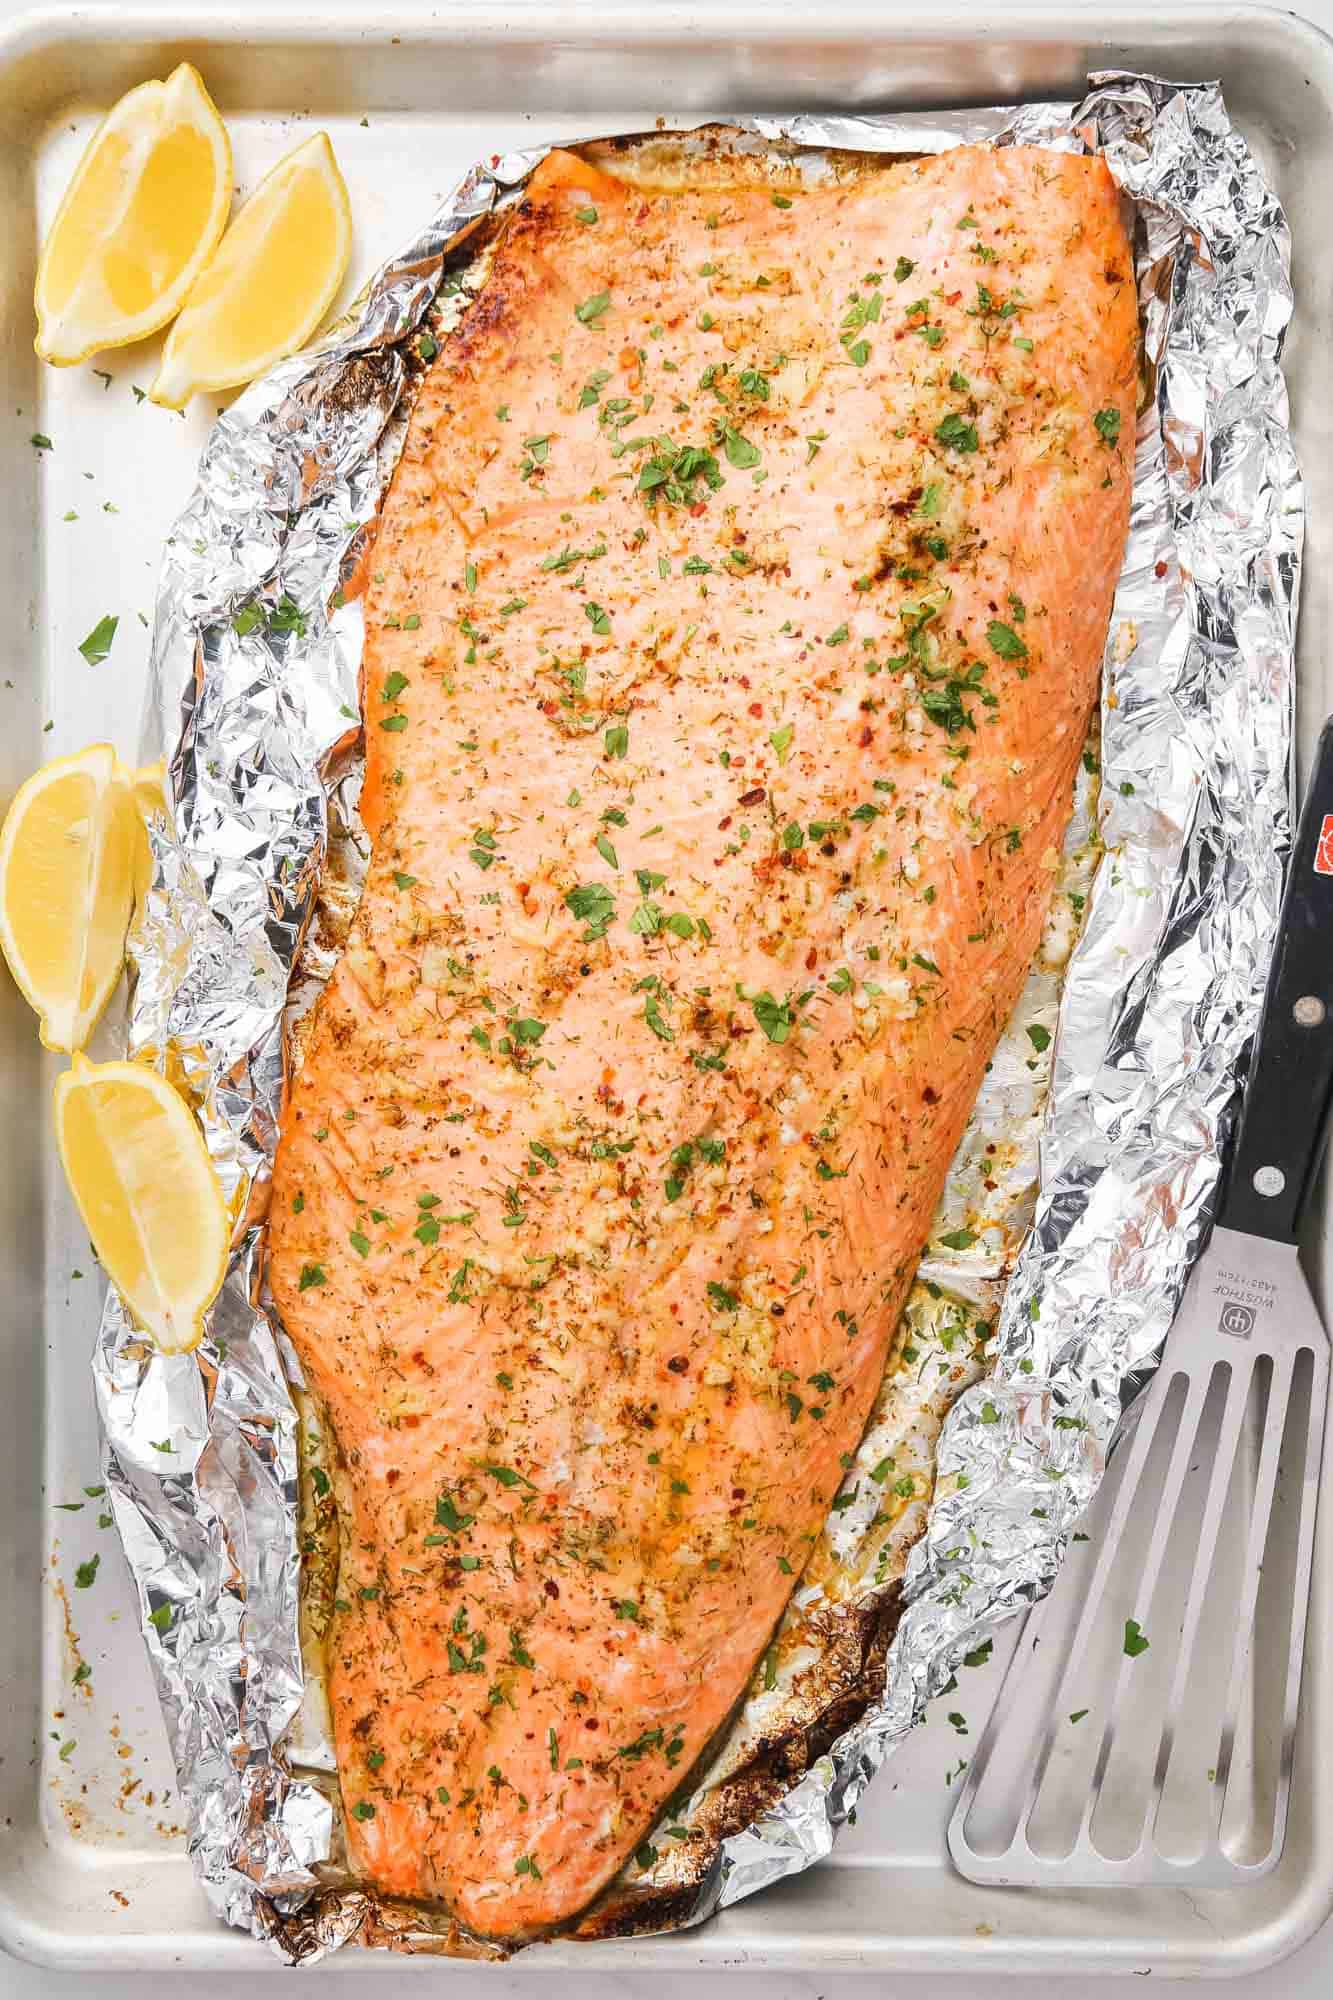 Overhead shot of baked trout fillet on foil, with lemon wedges on the side and a fish spatula